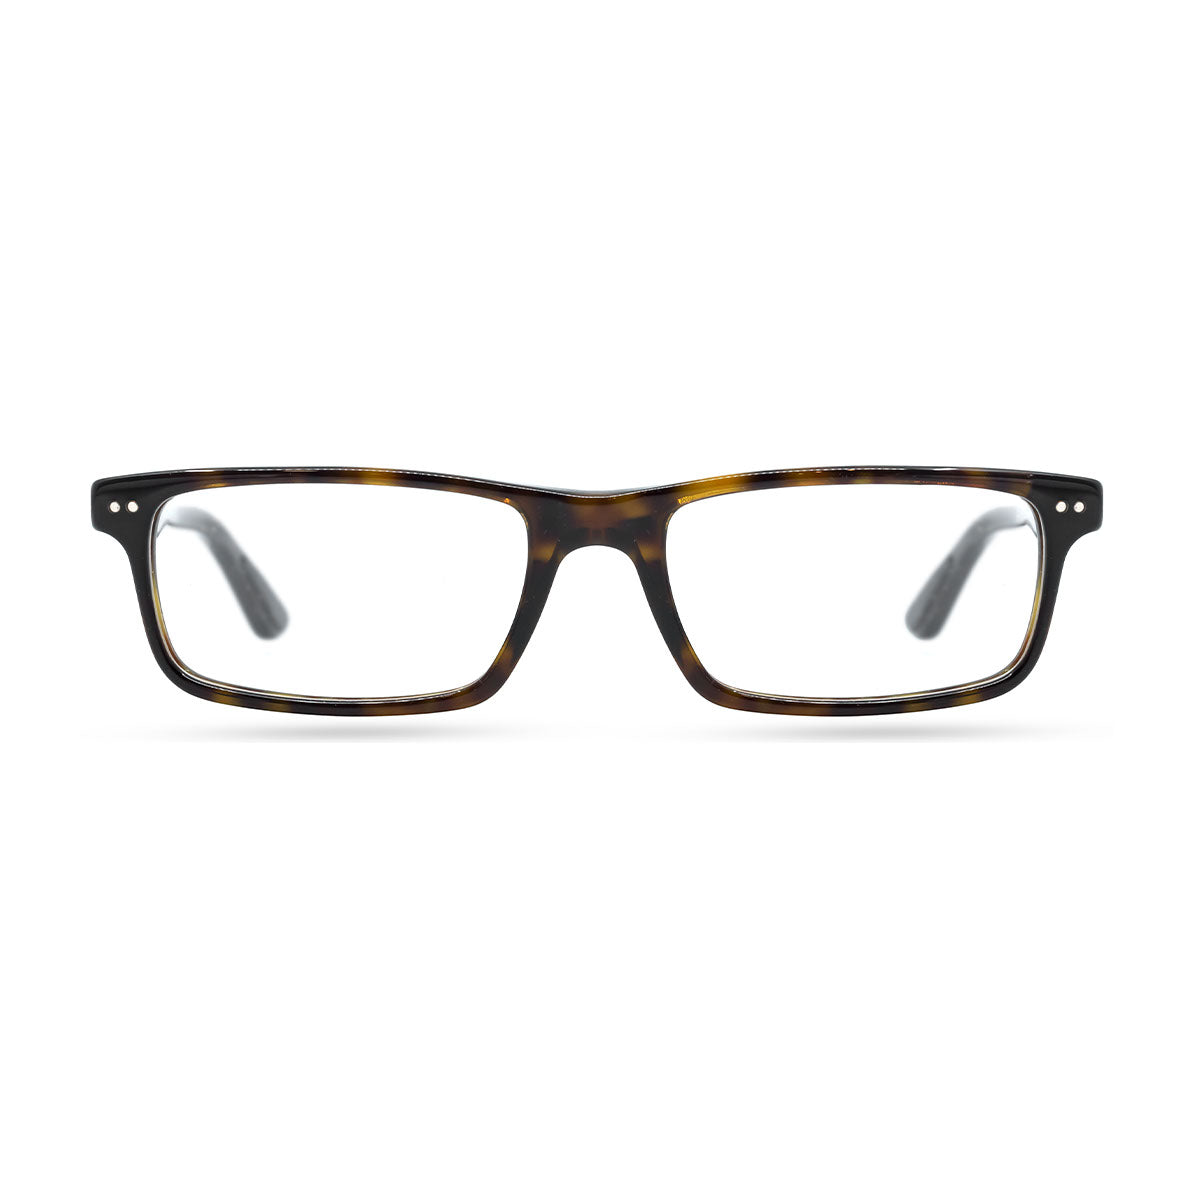 RAY BAN RB 5277 2012 spectacle-frame